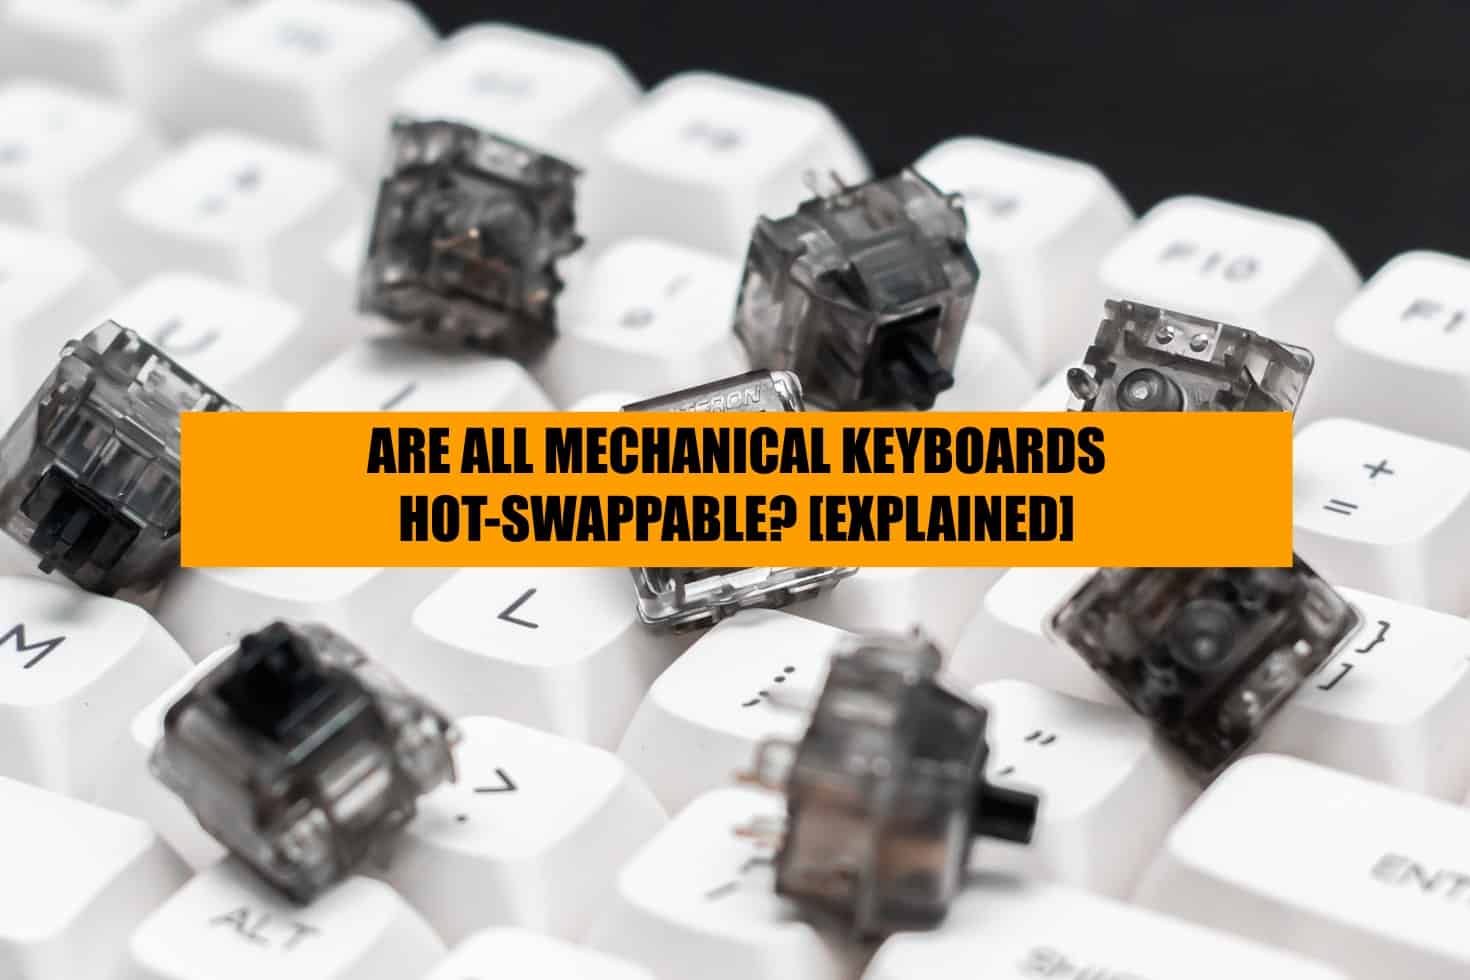 explaining that not all mechanical keyboards are hot-swappable